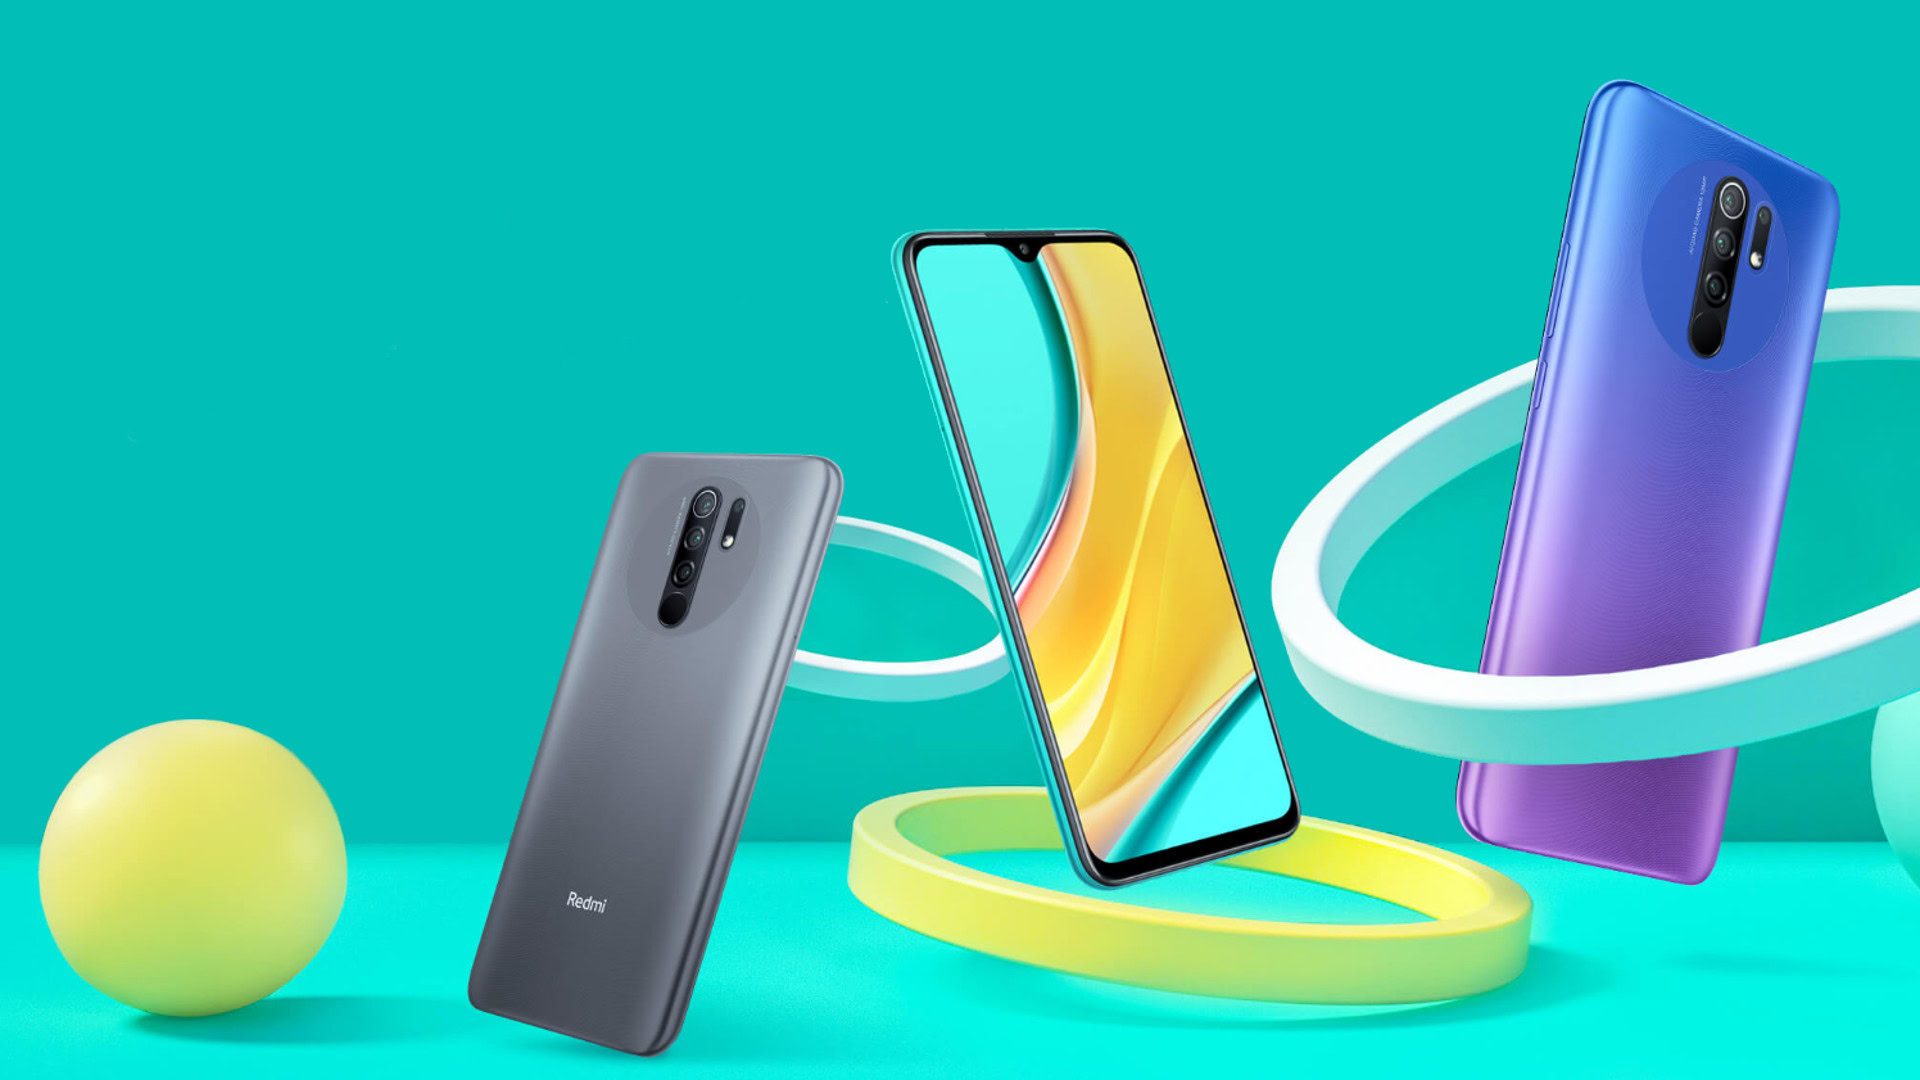 REDMI 9 is the top-selling phone on amazon 2021